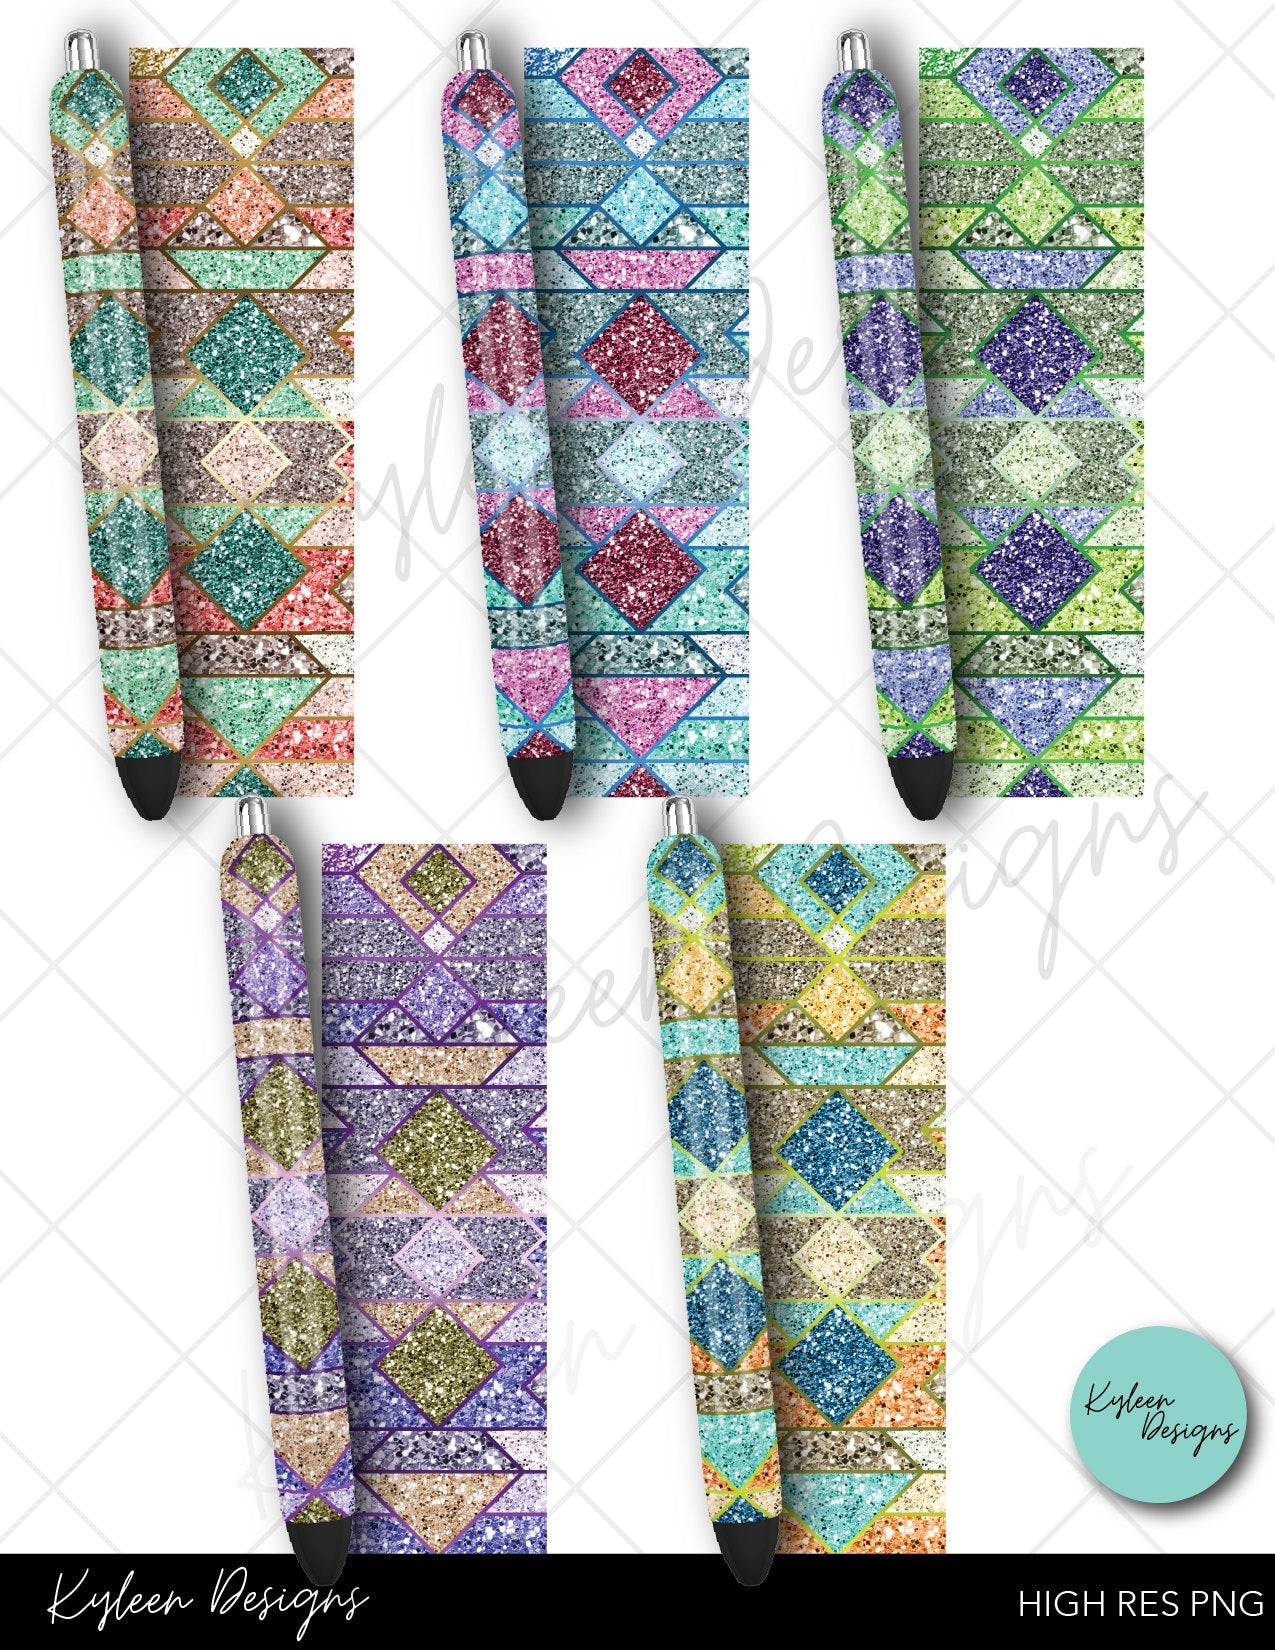 Aztec glitter pen wraps for waterslide high RES PNG